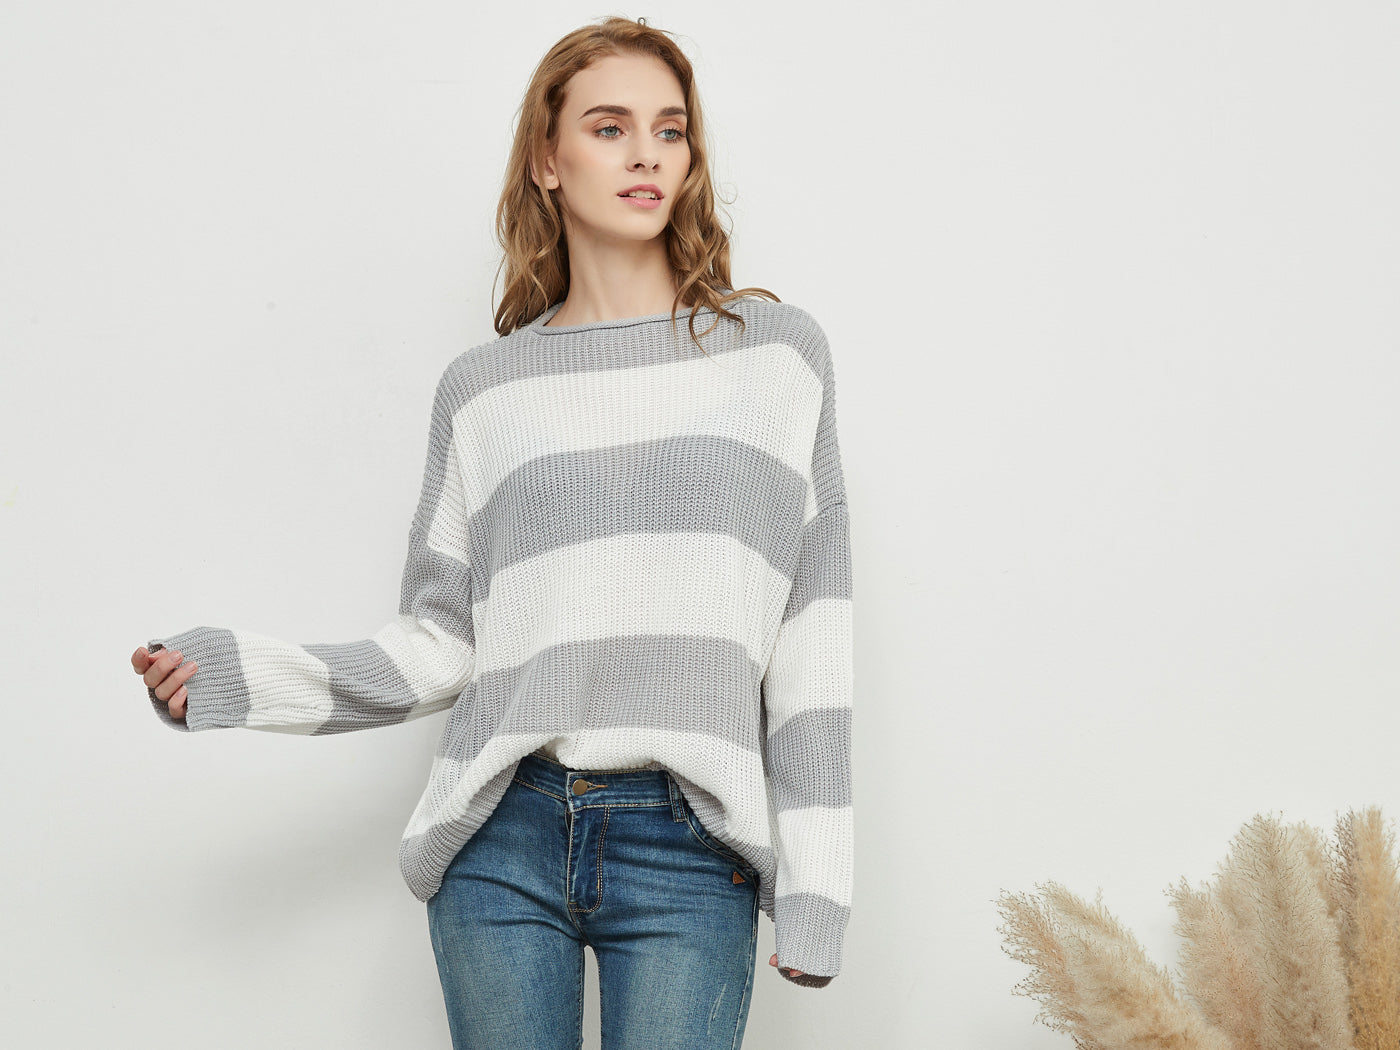 Women Striped Knitted Sweater Crew Neck Long Sleeve Casual Comfy Pullover Tops